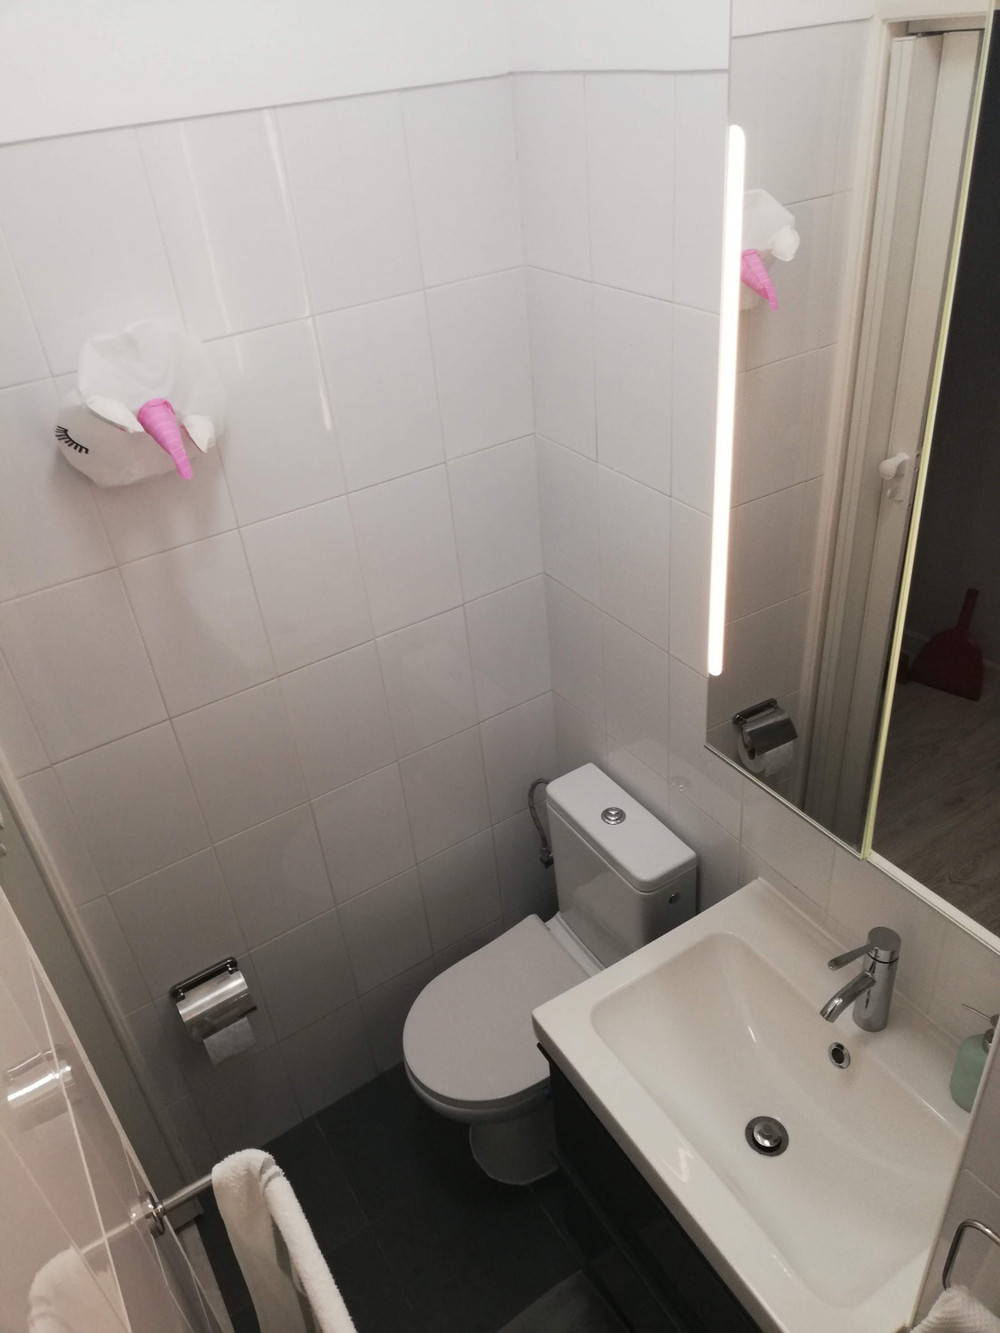 Sunny Double Room in 5 room flat